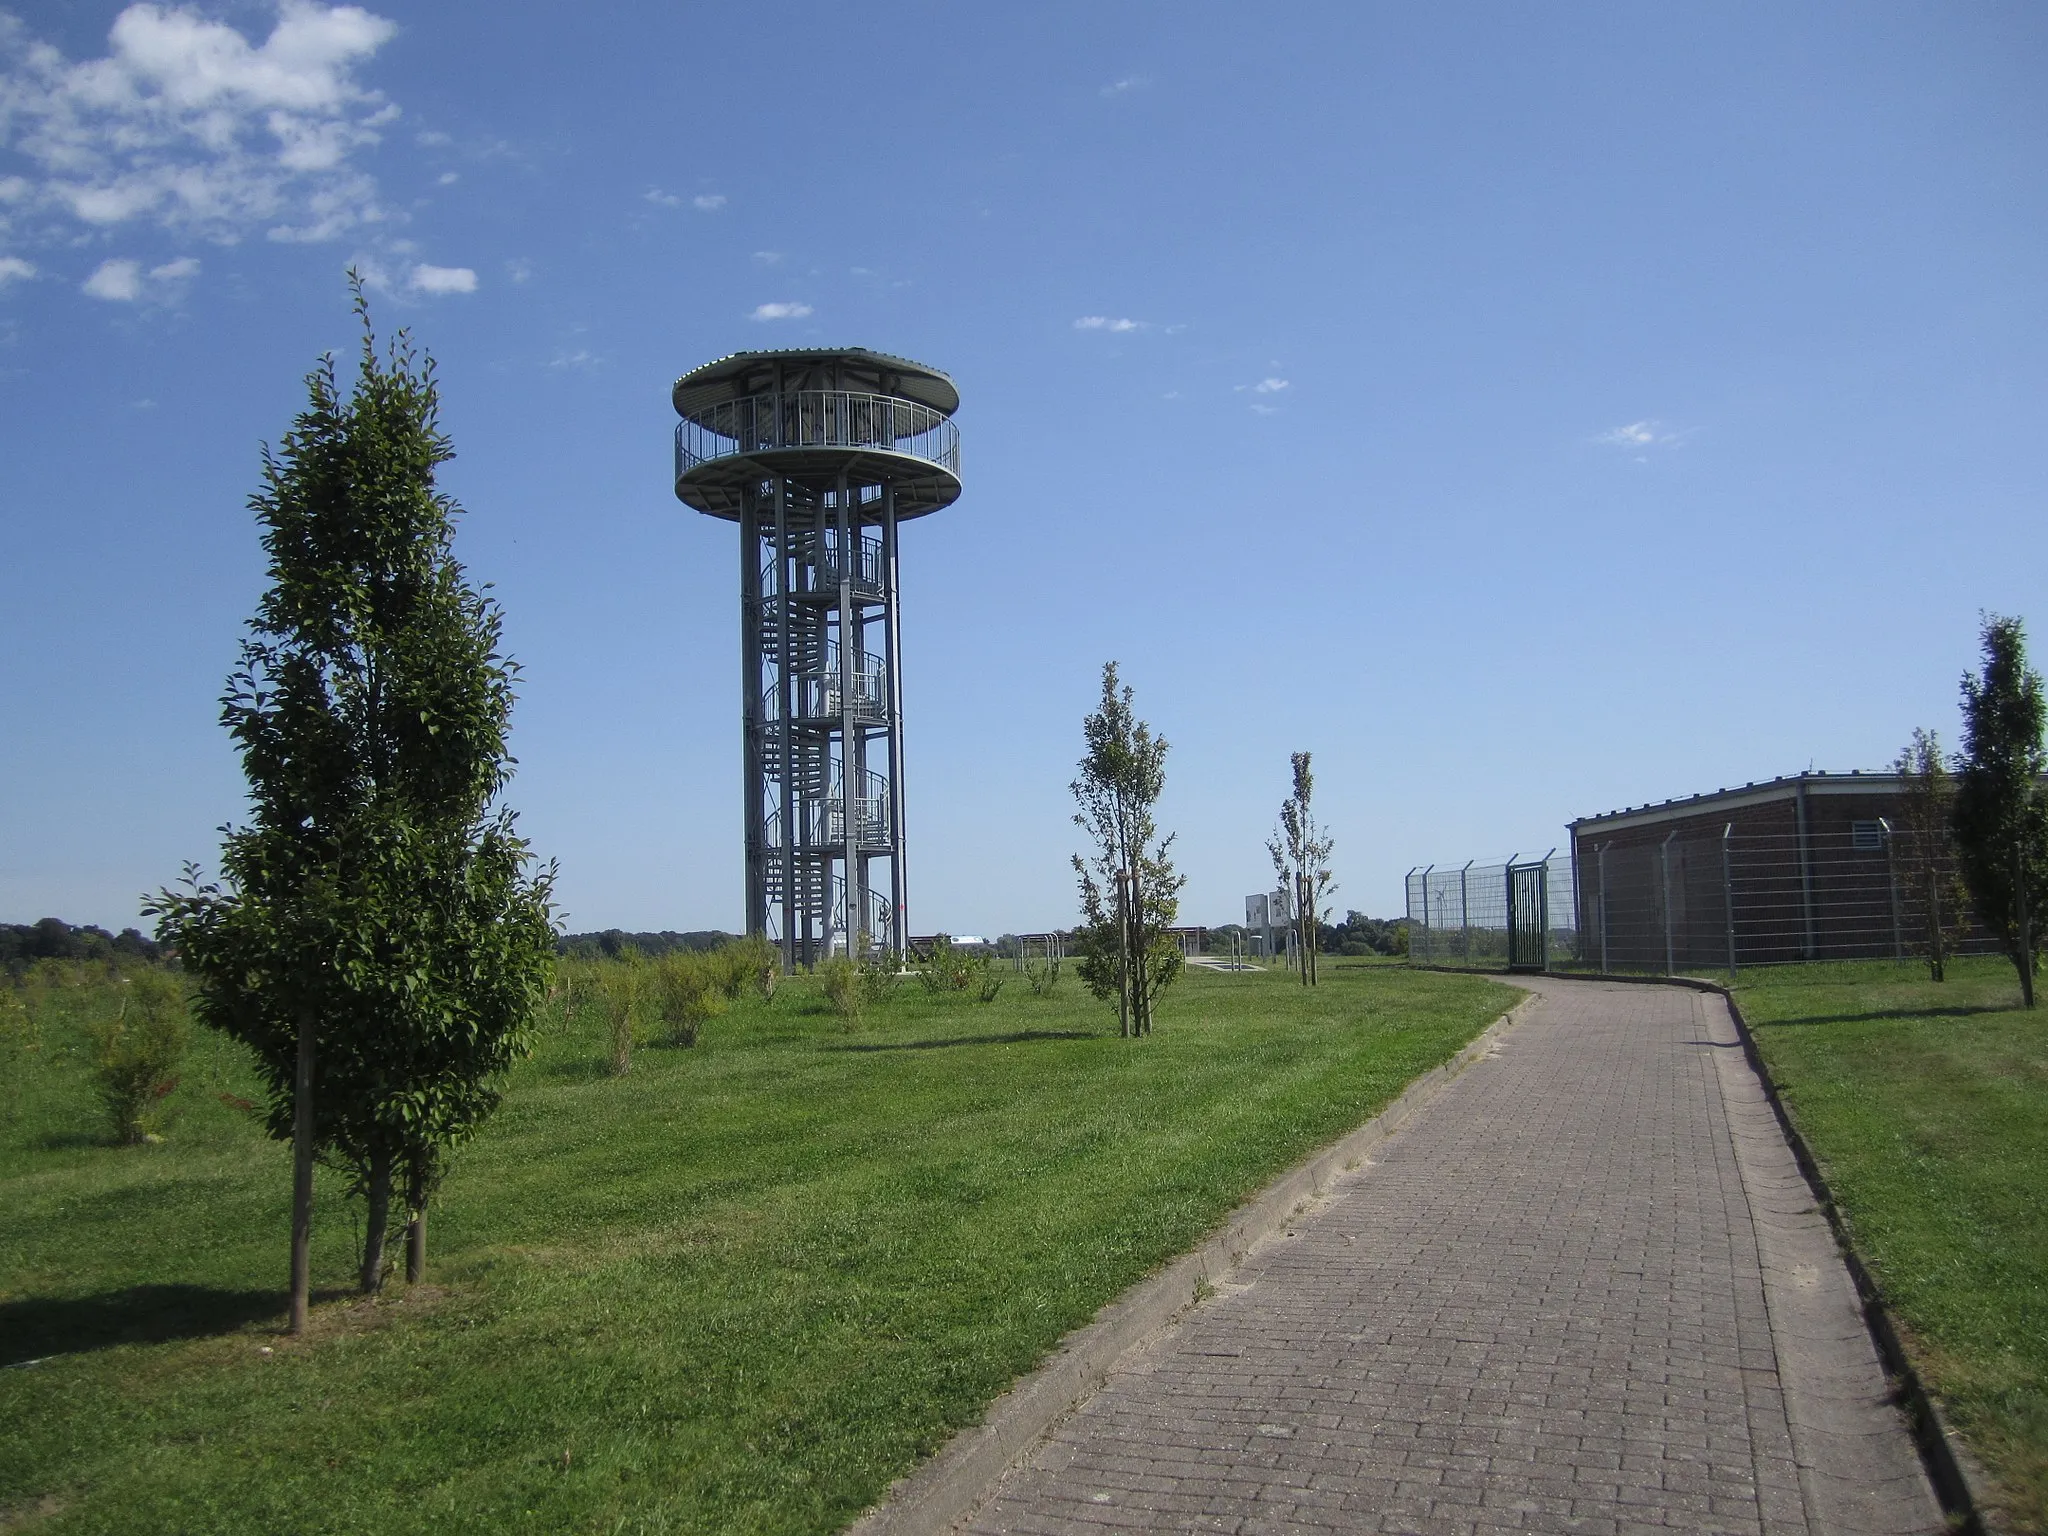 Photo showing: Observation tower in Lemwerder, Germany, which gives a view over the Weser river.